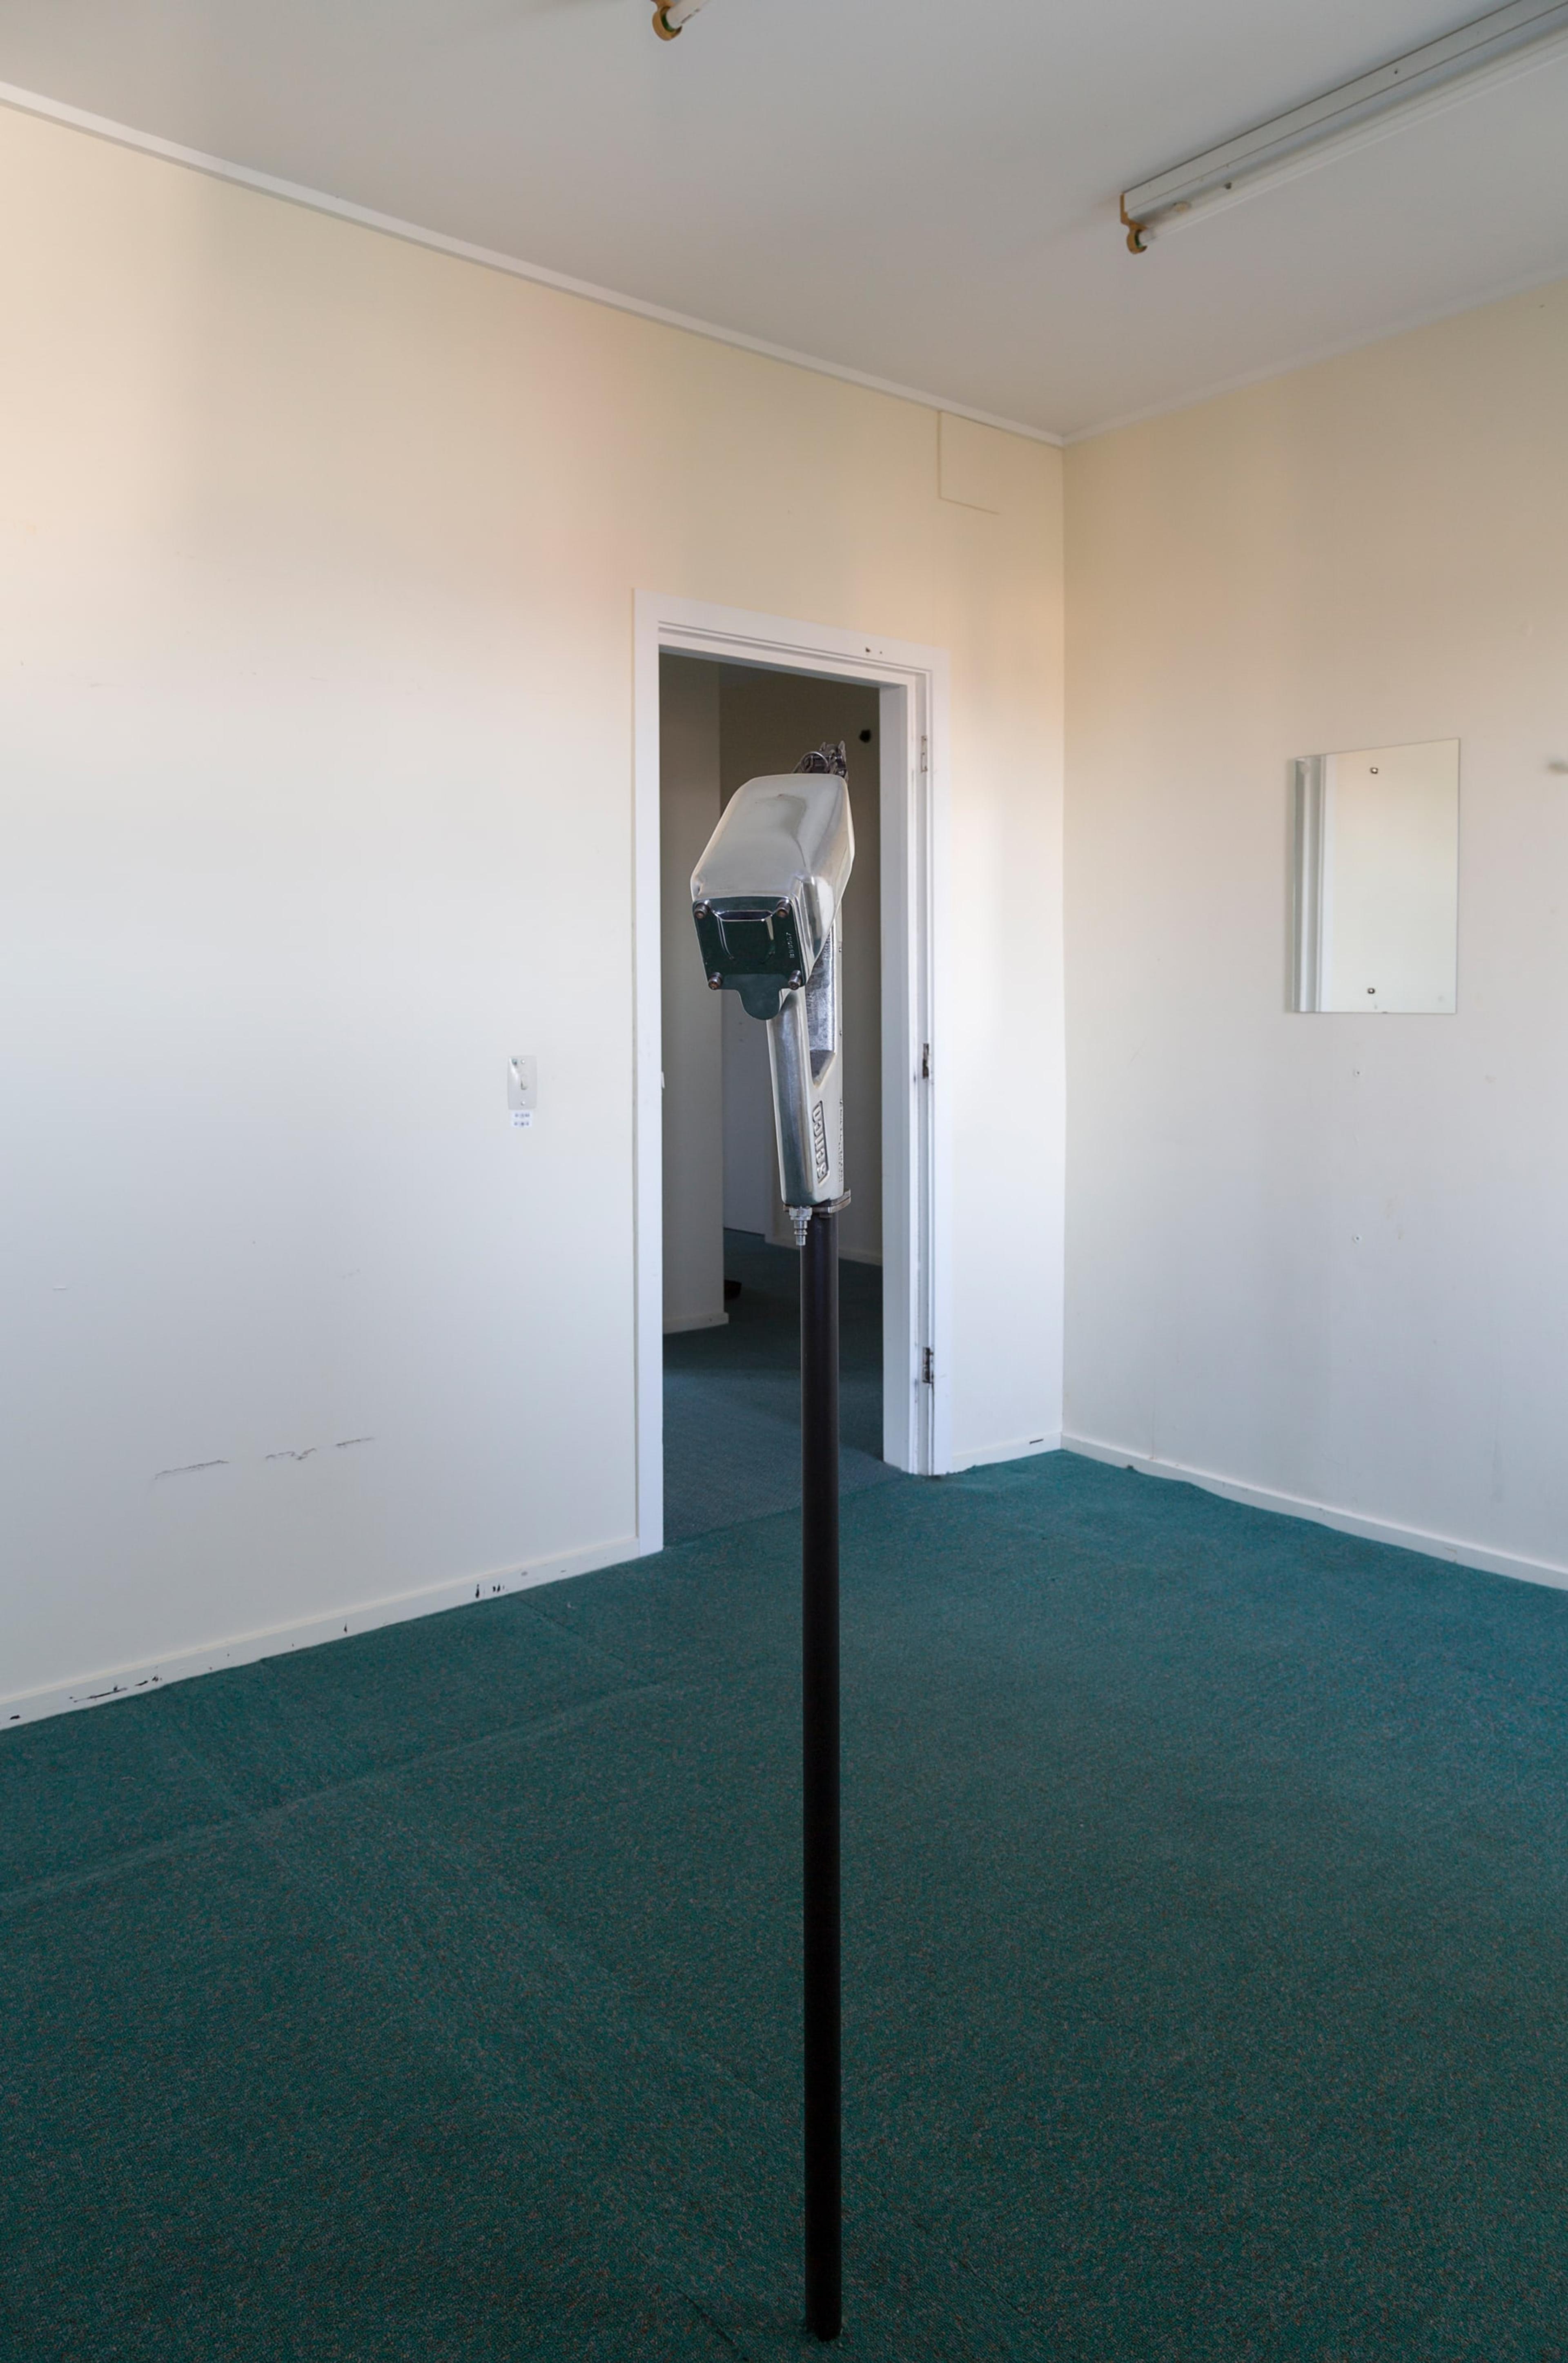 Richard Frater, Living Cities 2011–, 2015, installation view at the Adam Art Gallery, Victoria University of Wellington (photo: Shaun Waugh)